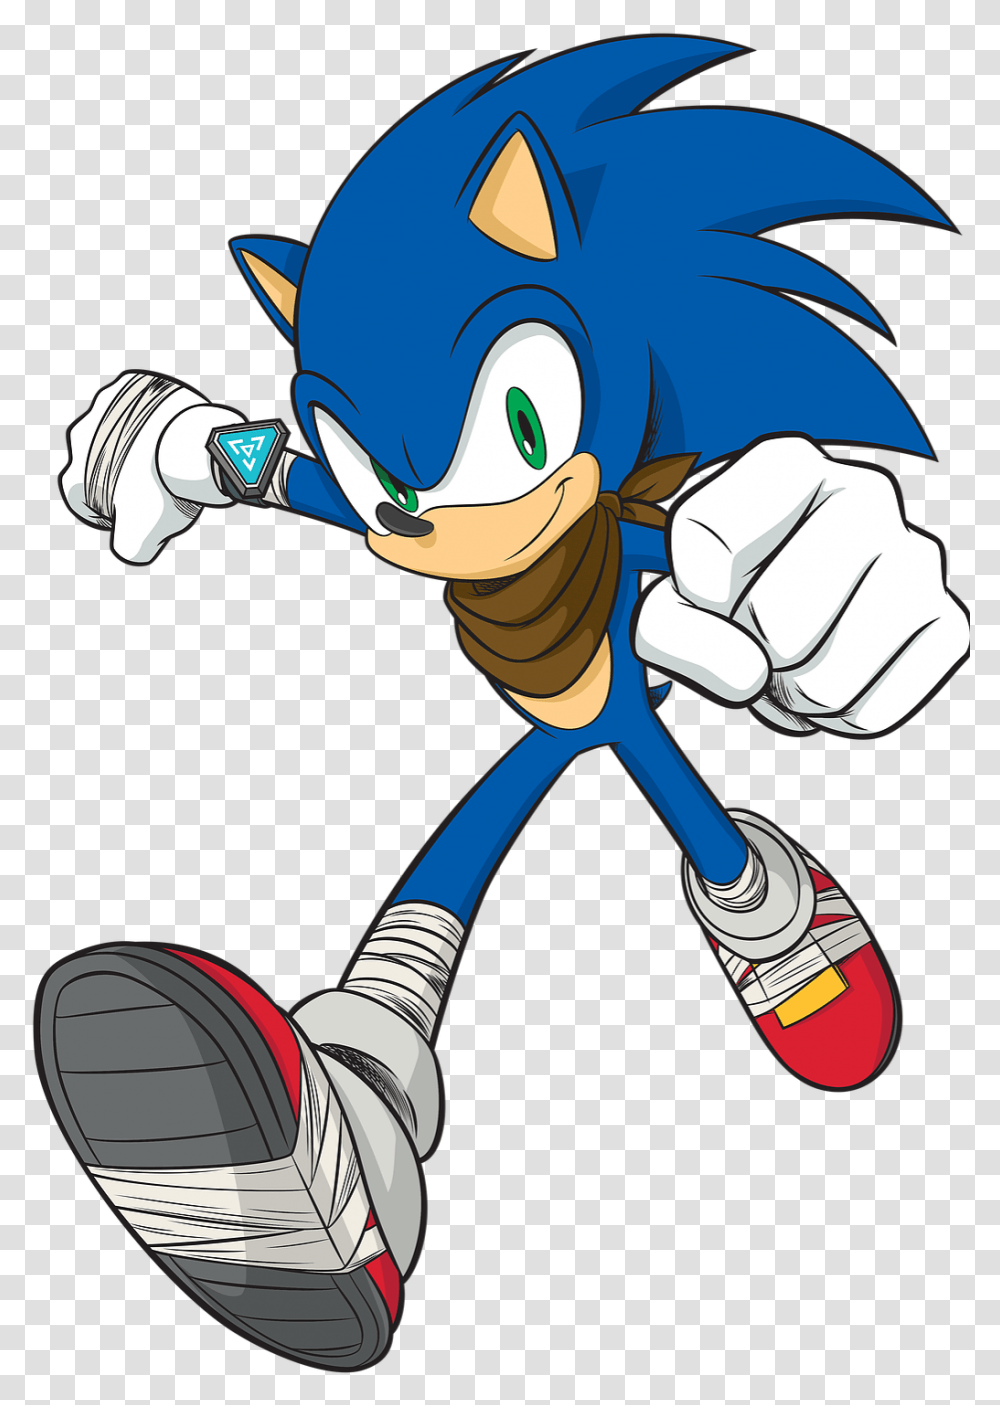 Sonic 2d Sonic Boom Render Sonic Boom Sonic, Hand, Hammer, Tool, Sweets Transparent Png